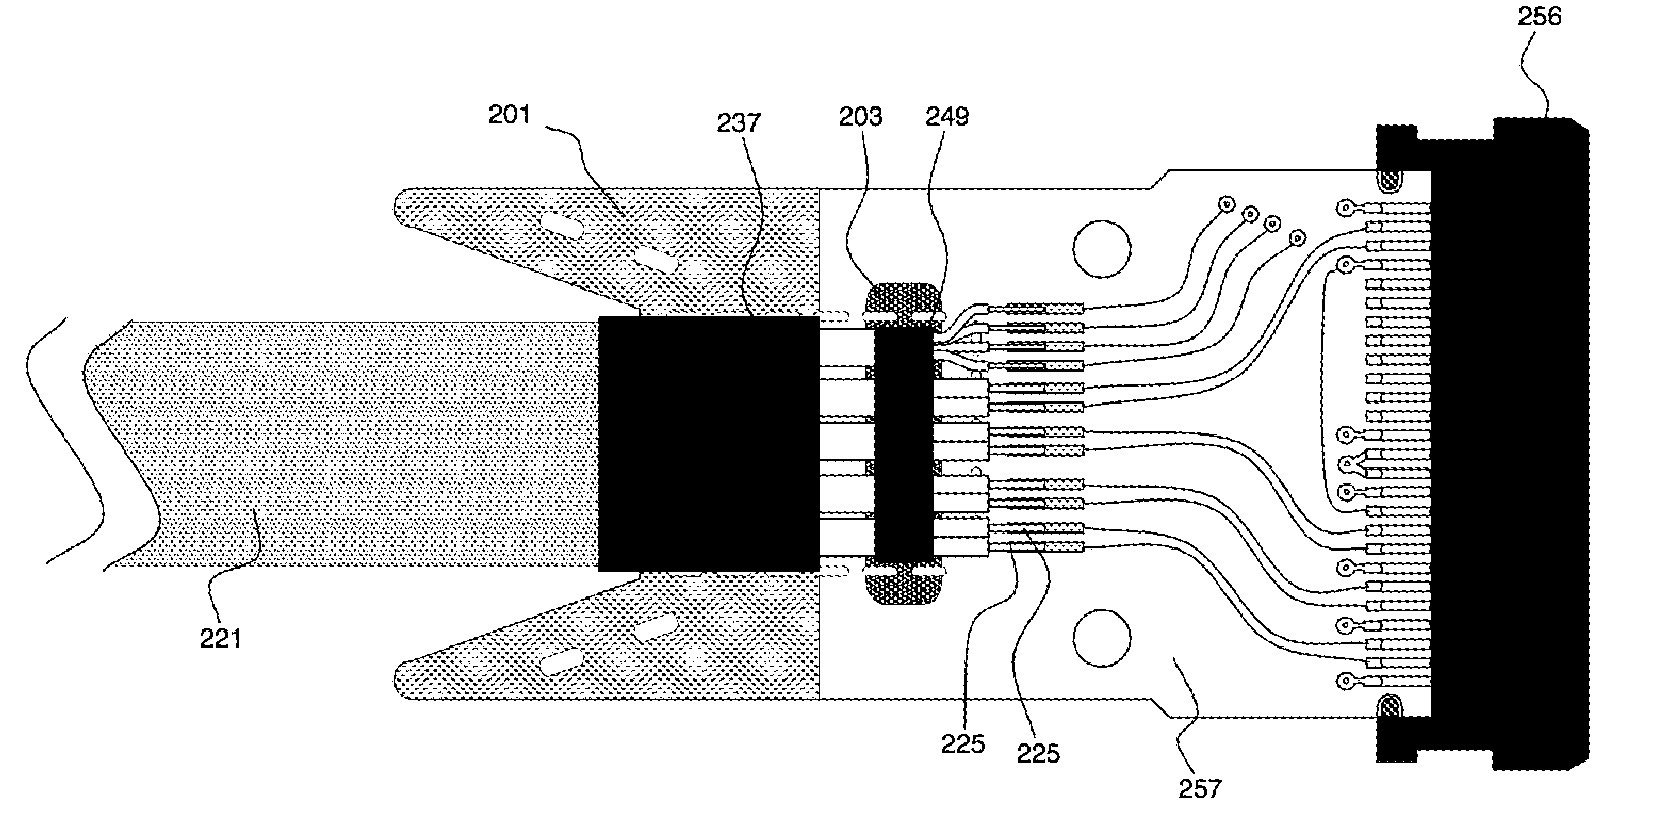 Electrical connection between cable and printed circuite board for high data speed and high signal frequency